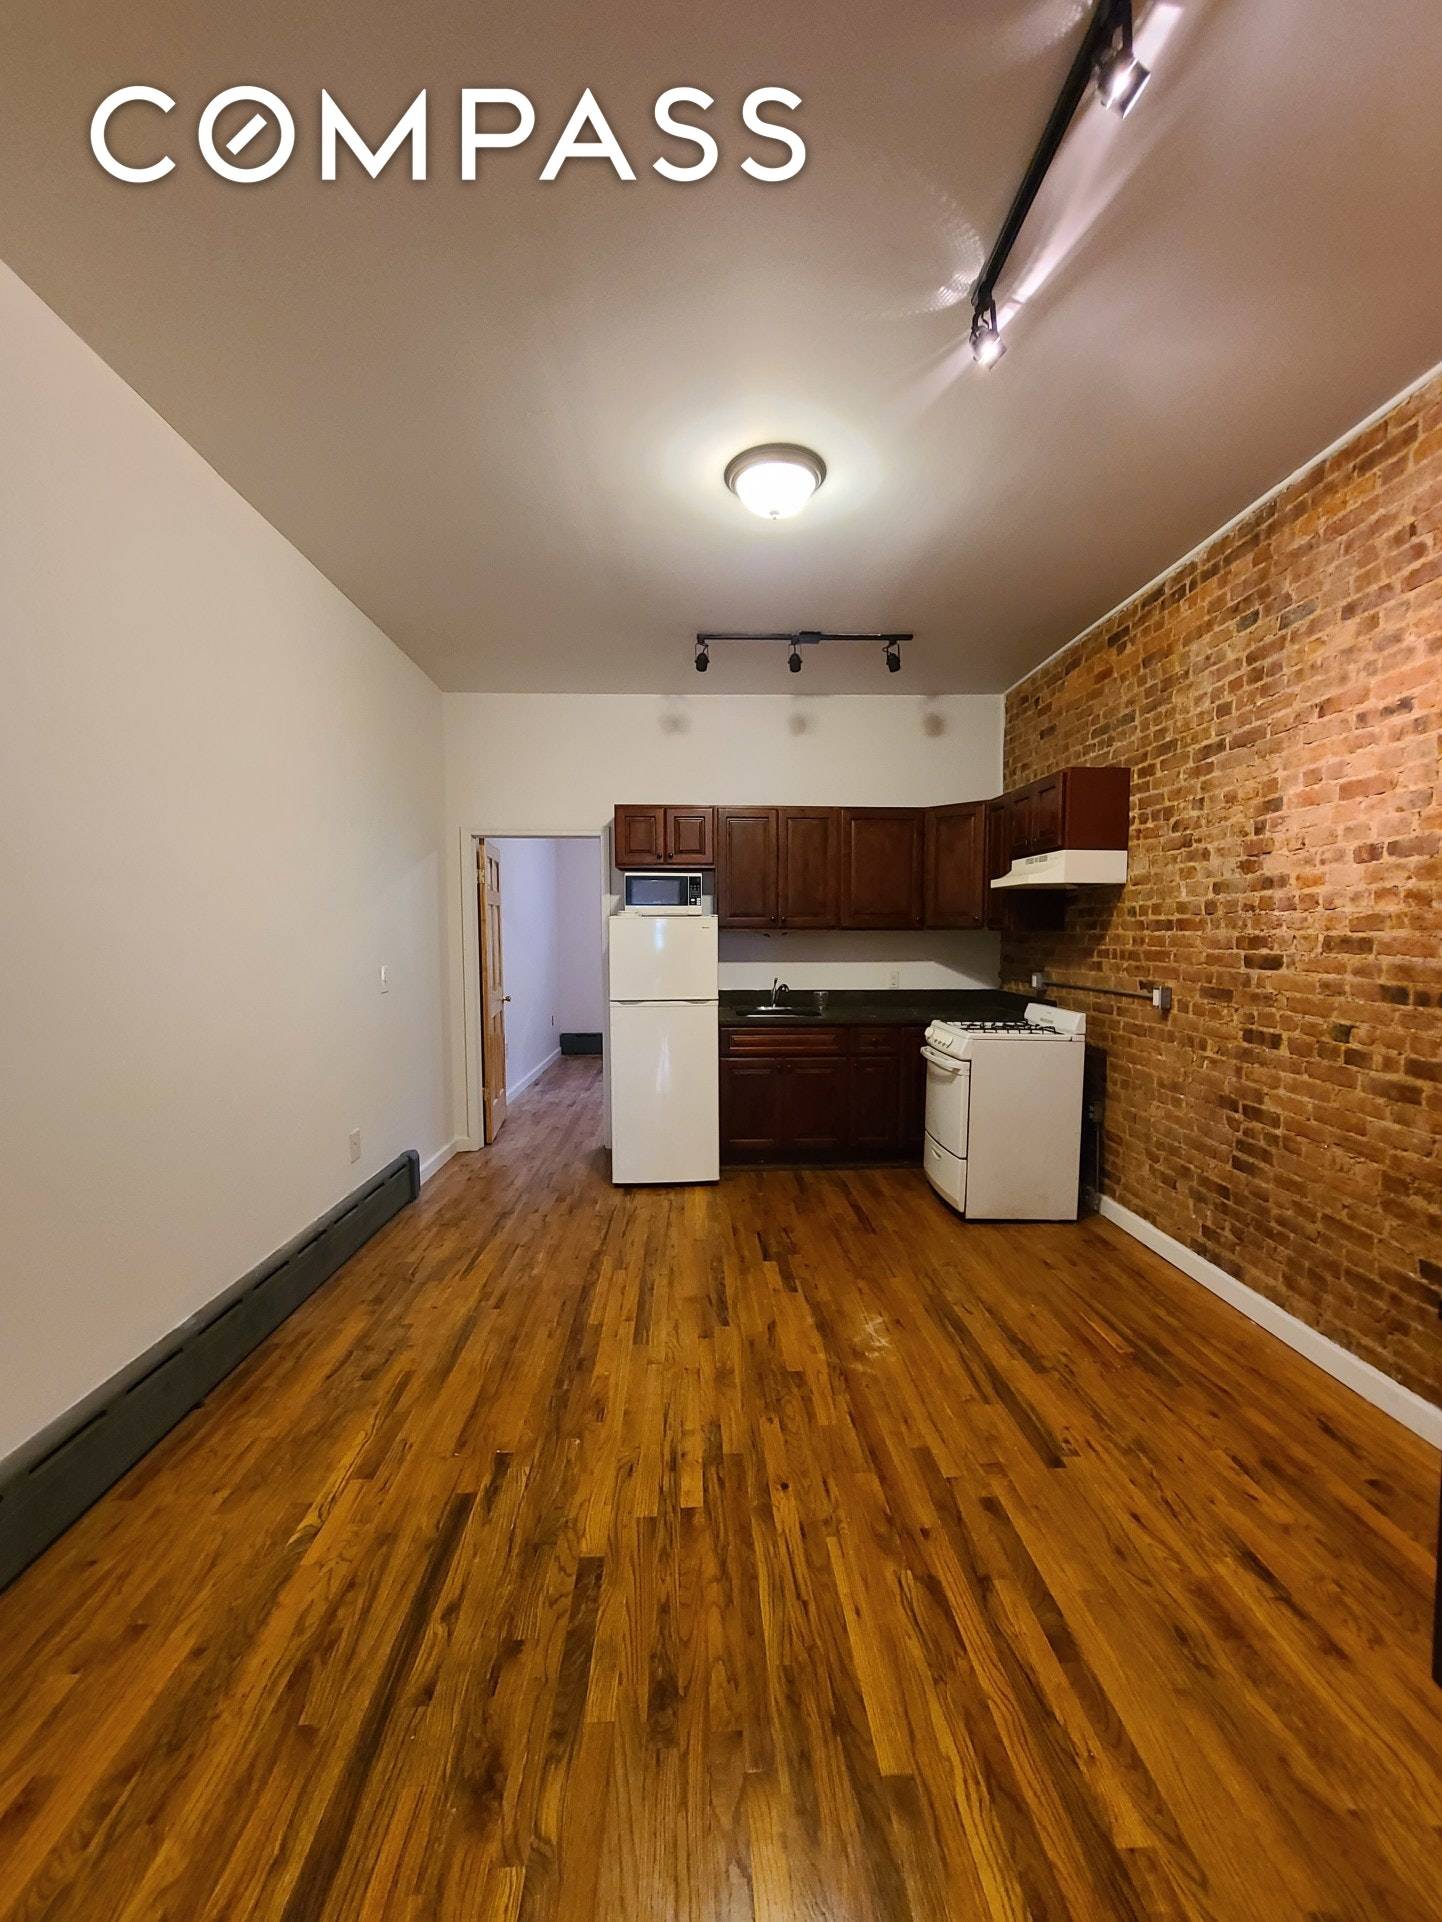 Located in bustling, prime Bushwick, this two bedroom apartment is available on the first floor of a six unit apartment building.